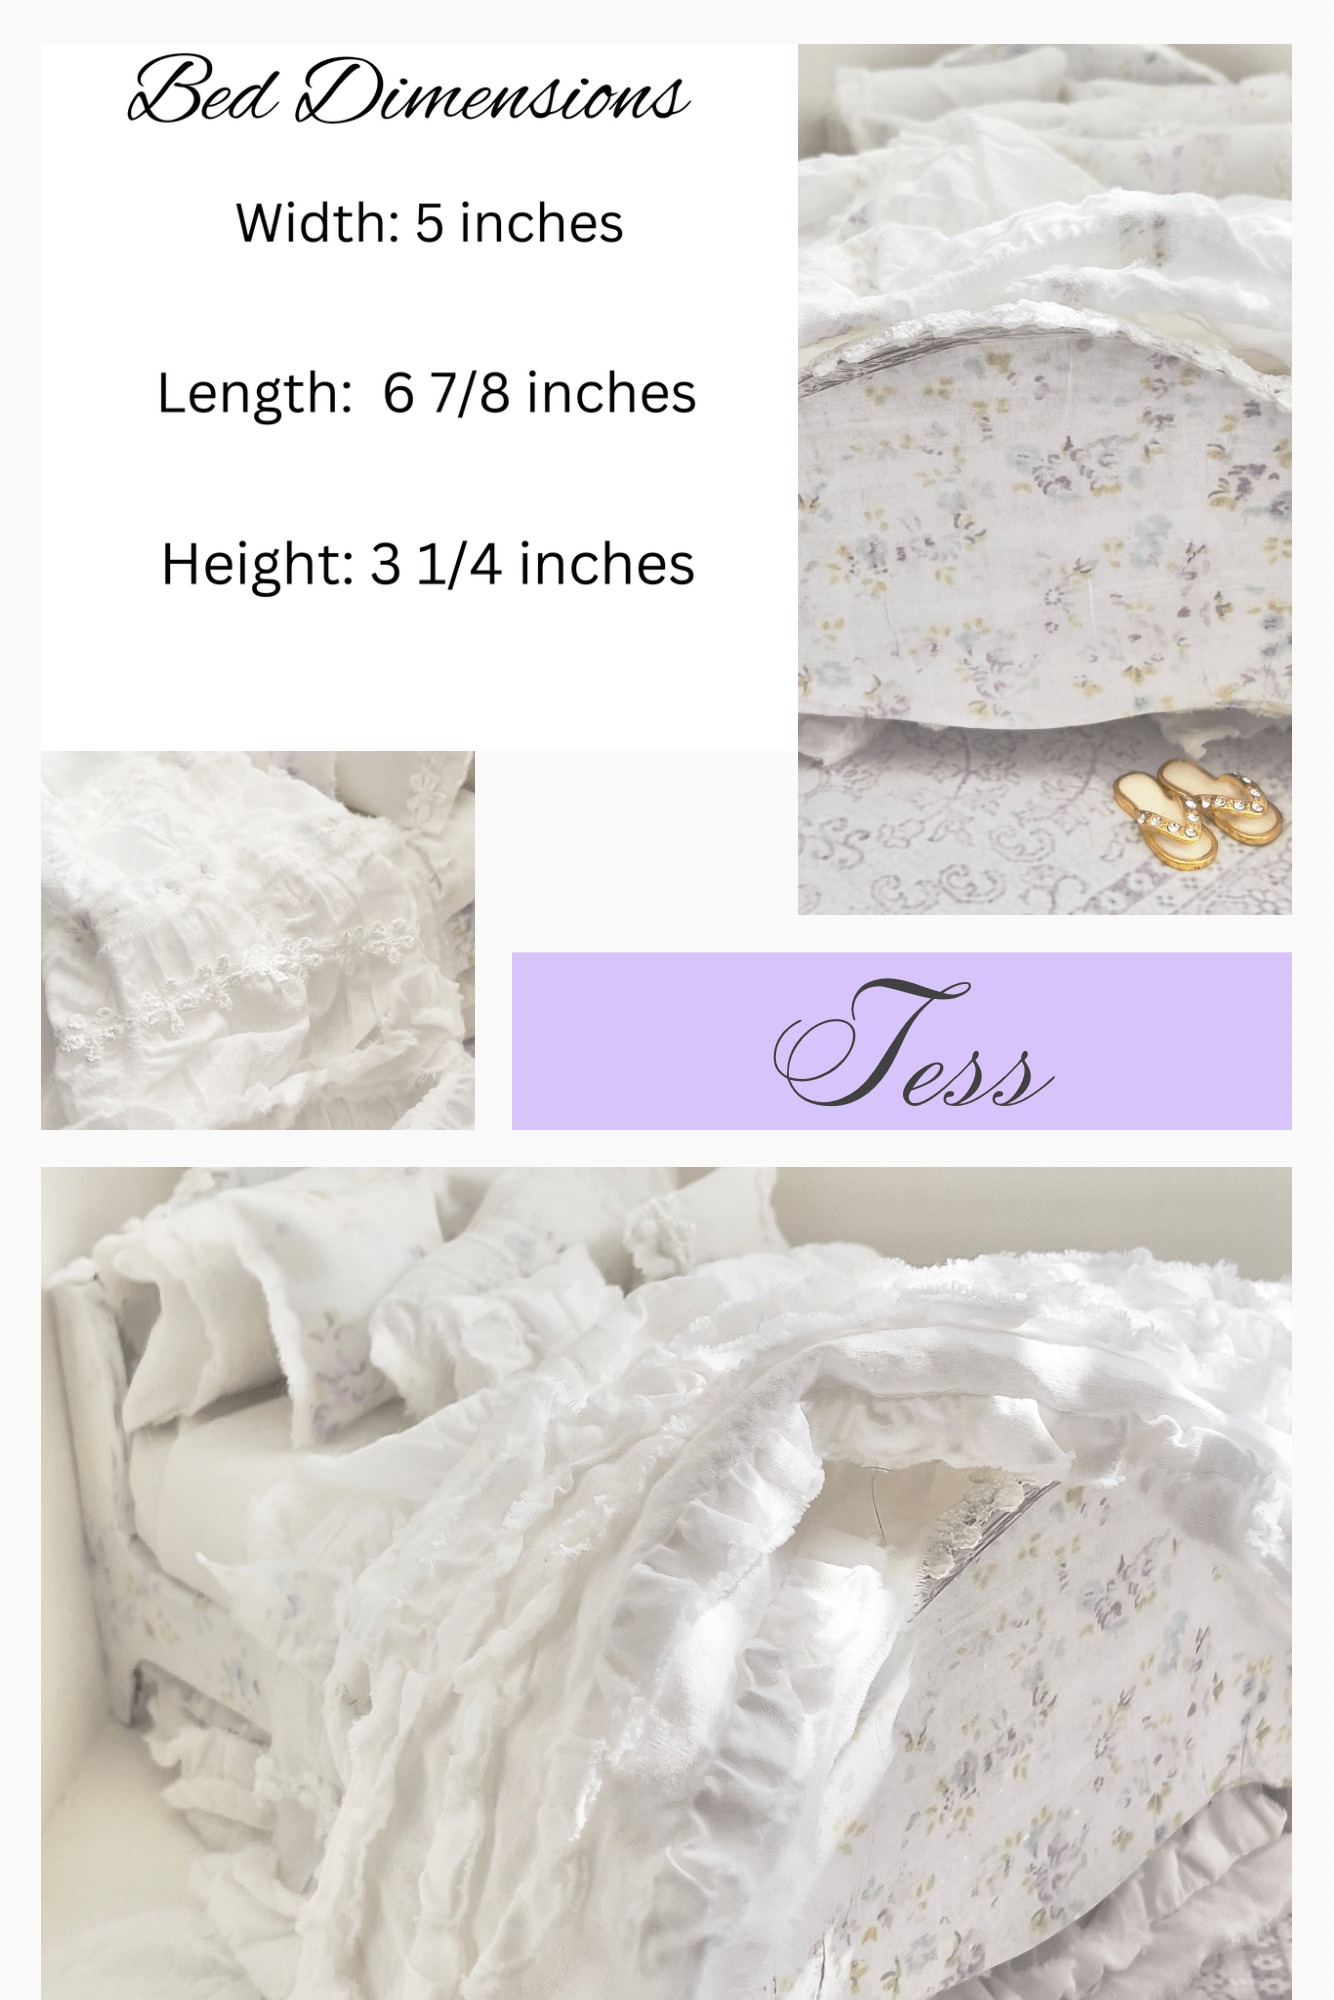 Chantallena Doll House Dressed 1:12 Scale Bed | White Decoupage Bed with White Cotton Bedding Set | Tess